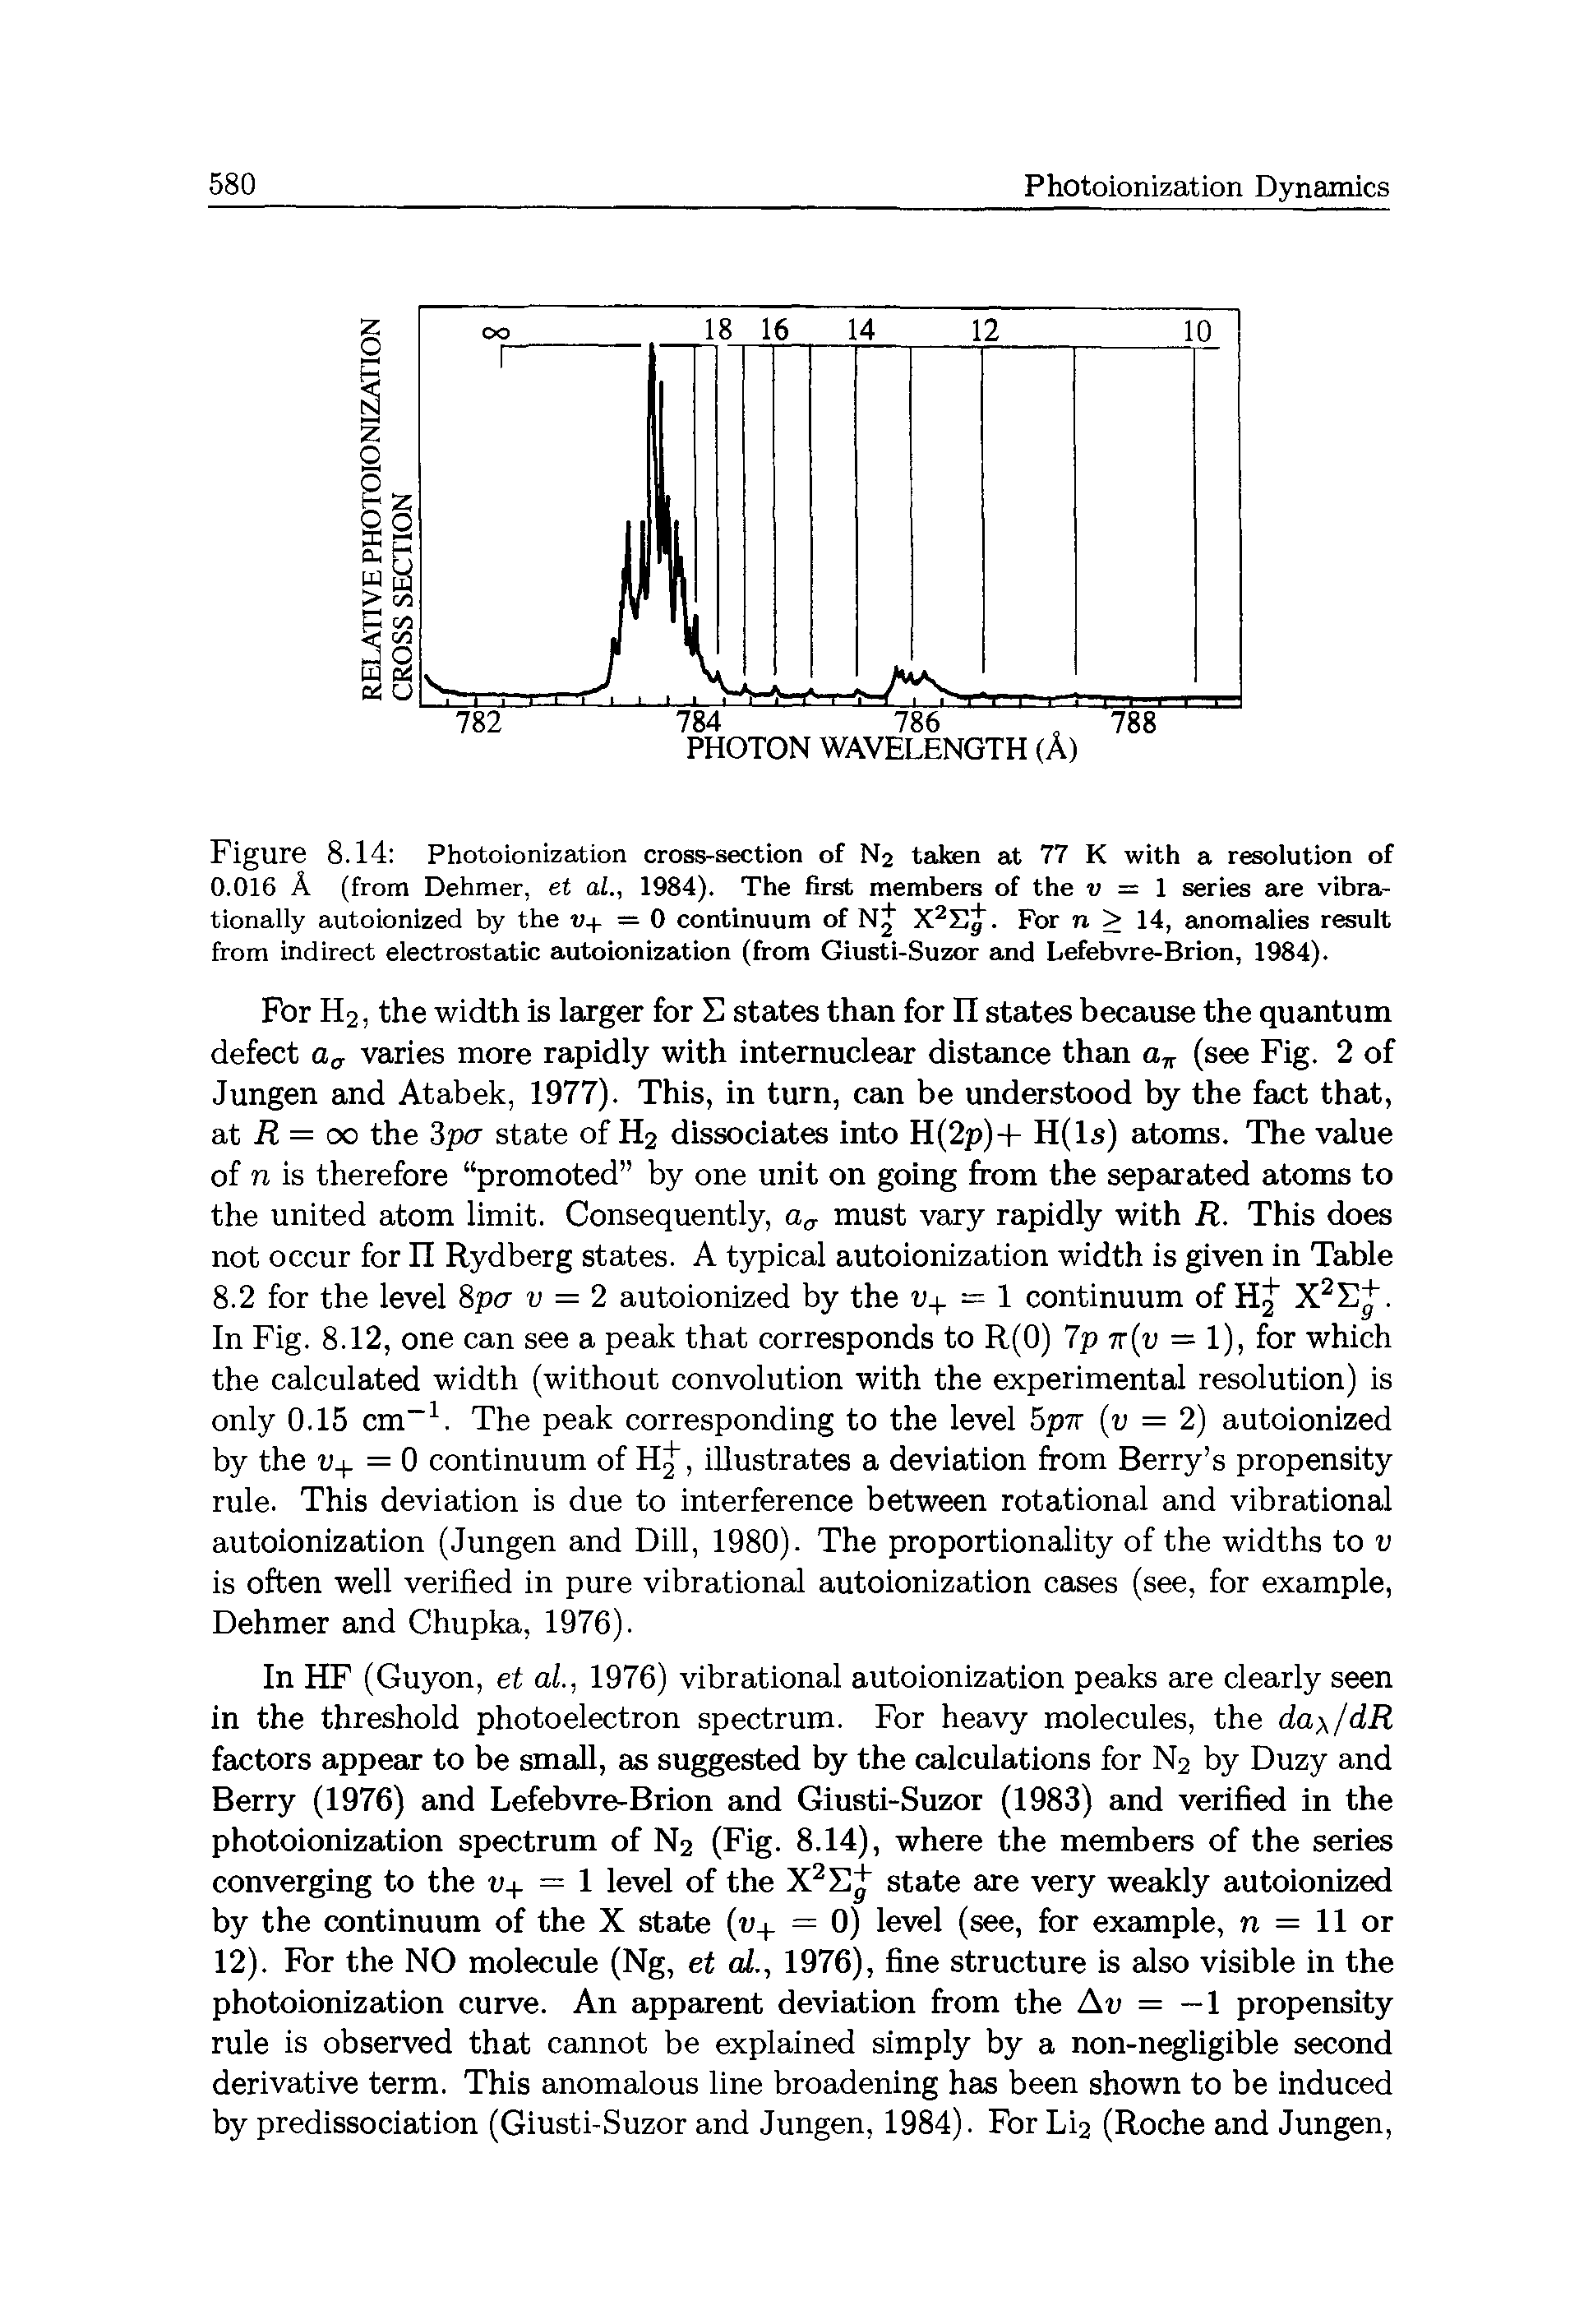 Figure 8.14 Photoionization cross-section of N2 taken at 77 K with a resolution of 0.016 A (from Dehmer, et al., 1984). The first members of the v = 1 series are vibra-tionally autoionized by the v+ = 0 continuum of Nj X2Sg. For n > 14, anomalies result from indirect electrostatic autoionization (from Giusti-Suzor and Lefebvre-Brion, 1984).